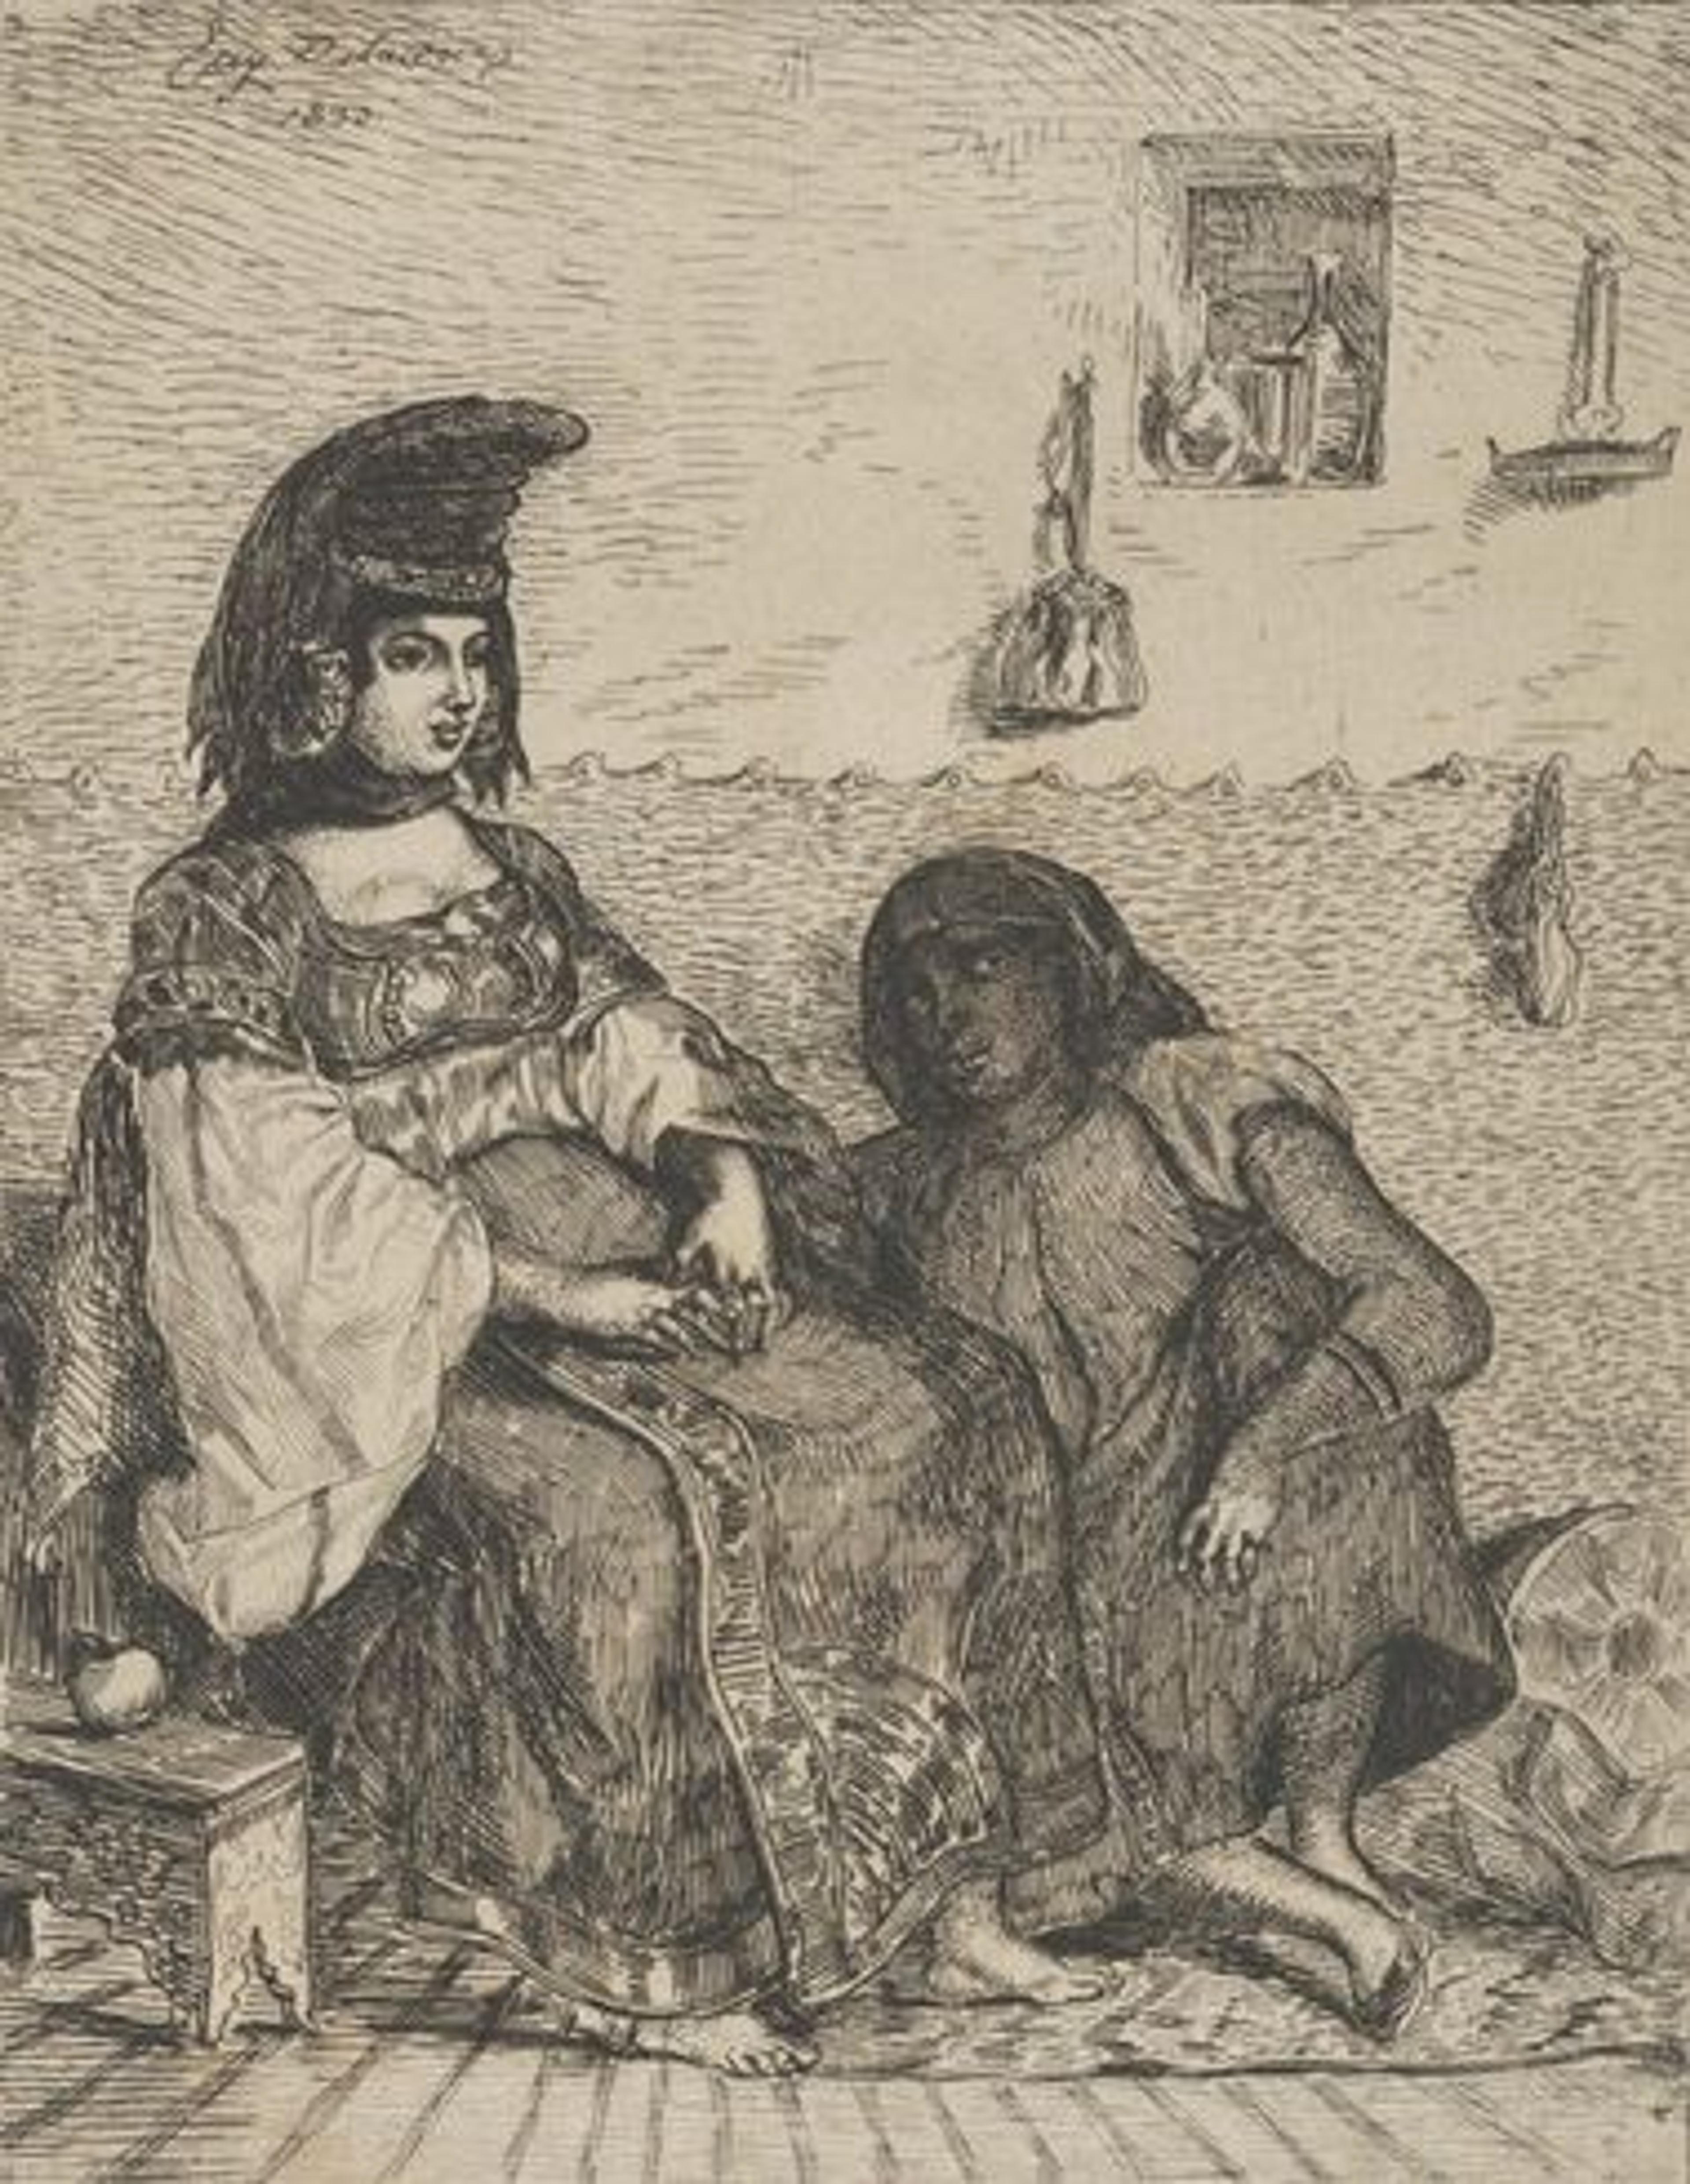 An etching by Eugene Delacroix depicting a Jewish bride sitting next to her servant